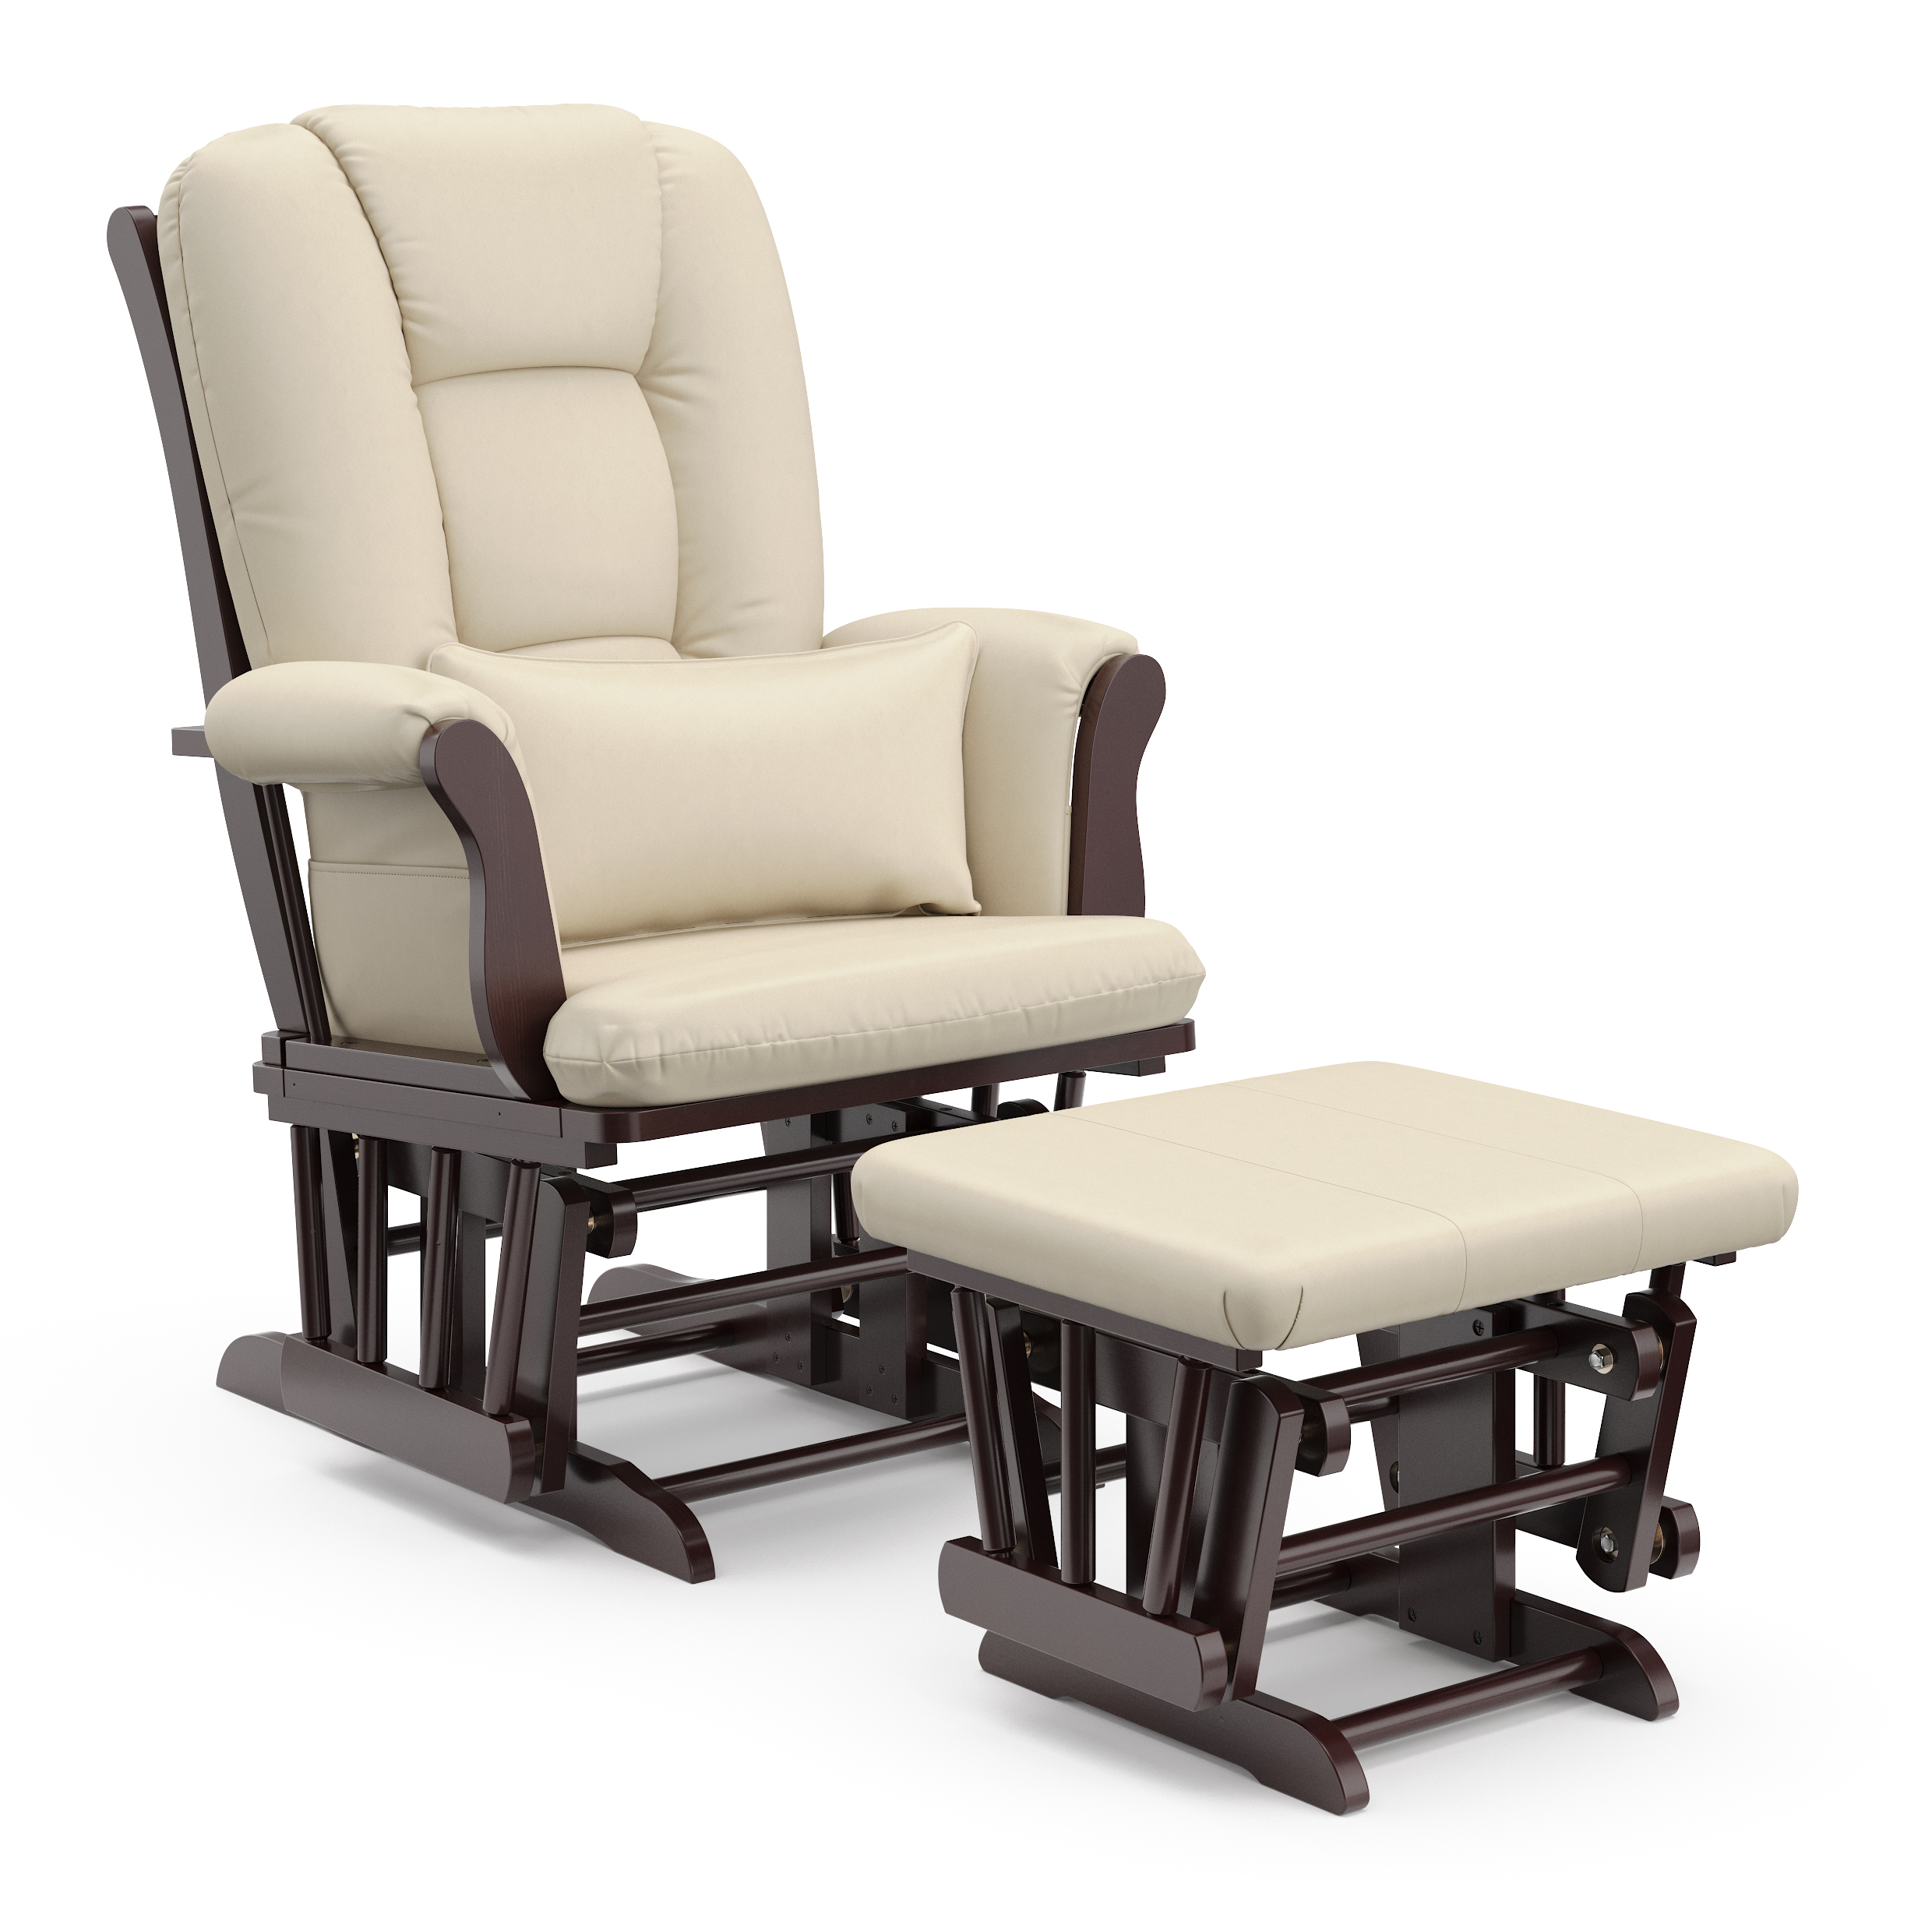 Storkcraft Tuscany Glider and Ottoman with Lower Lumbar Pillow, Espresso Finish with Beige Cushions - image 1 of 7